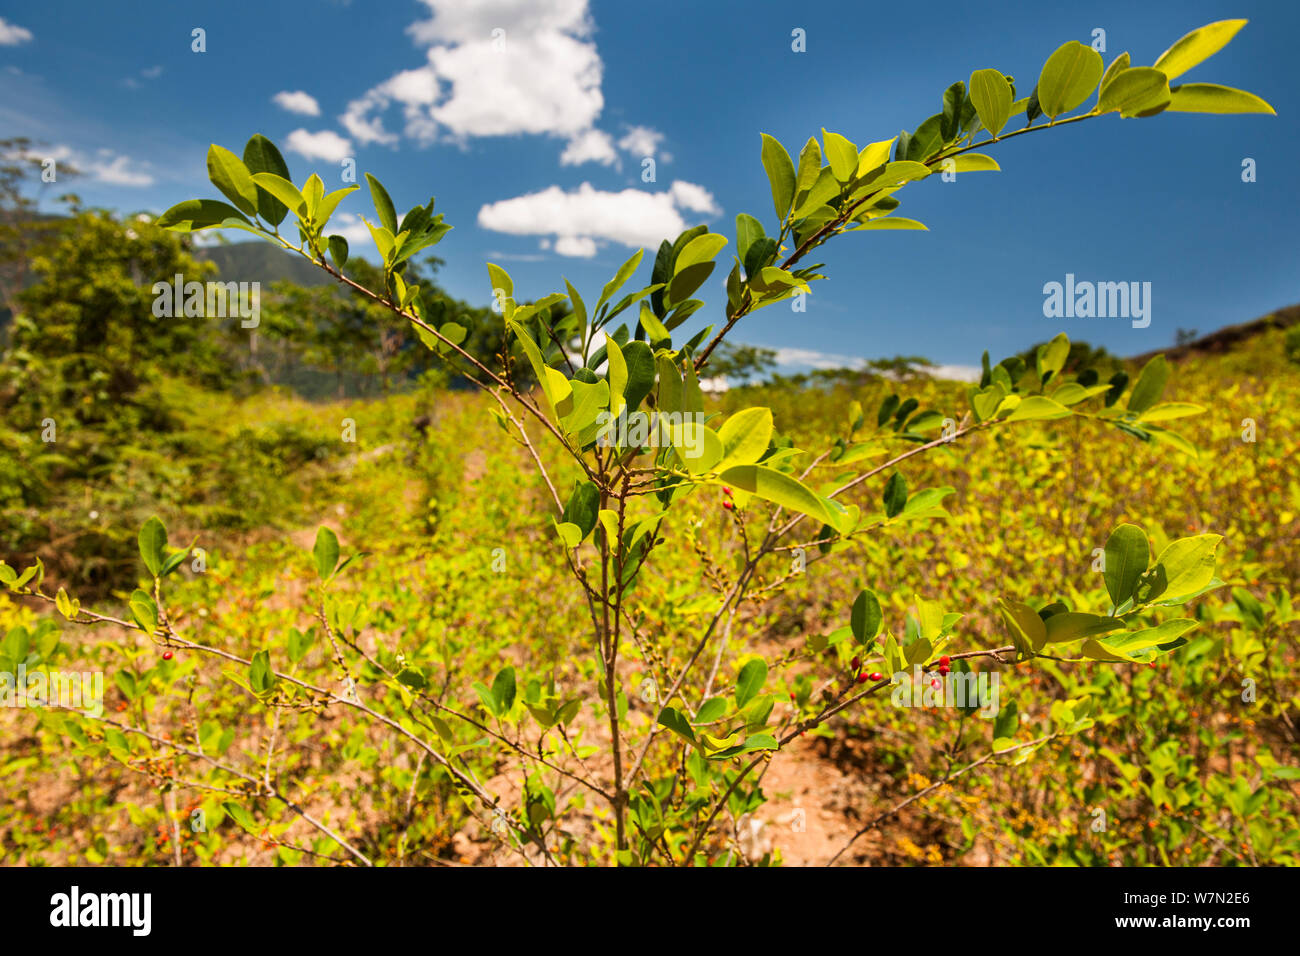 Cultivated Coca (Erythroxylum coca) plants growing the valleys below the Andes, Bolivia, November Stock Photo